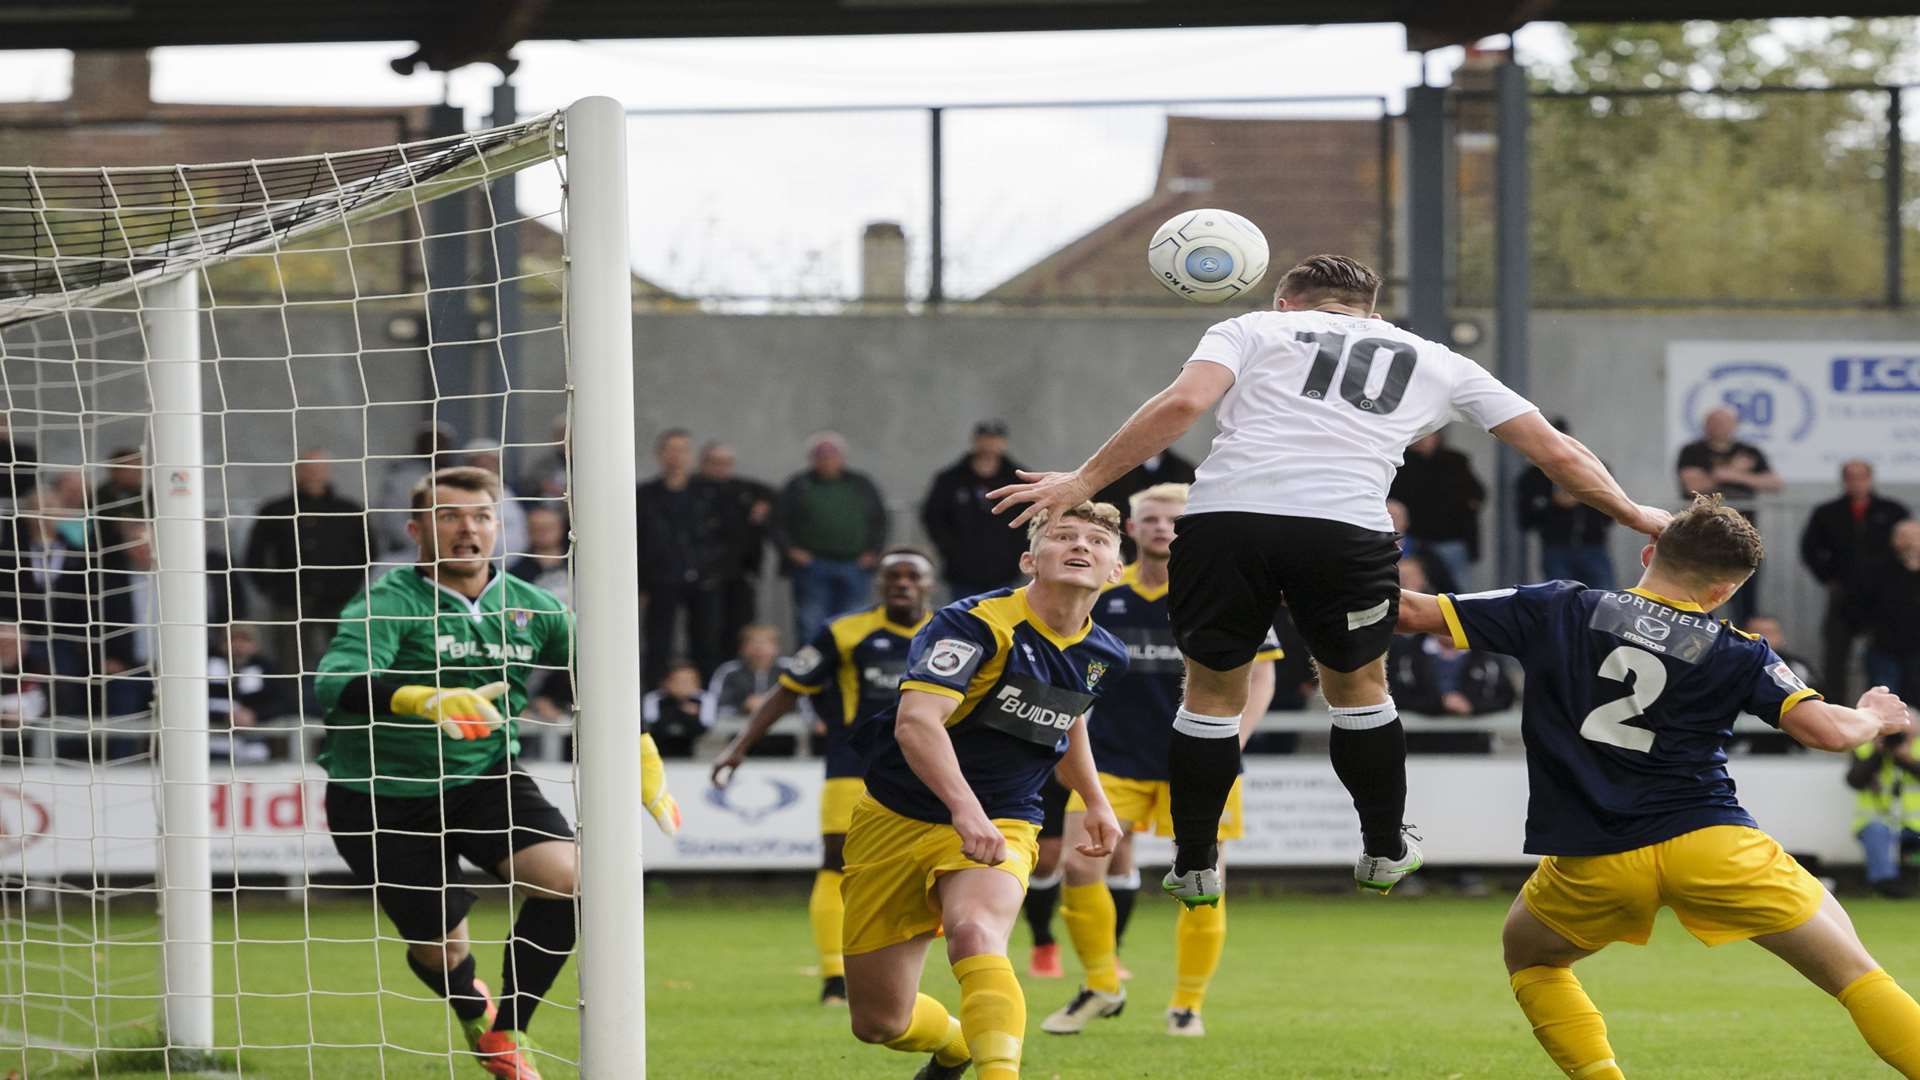 Andy Pugh up well to score Dartford's third goal Picture: Andy Payton